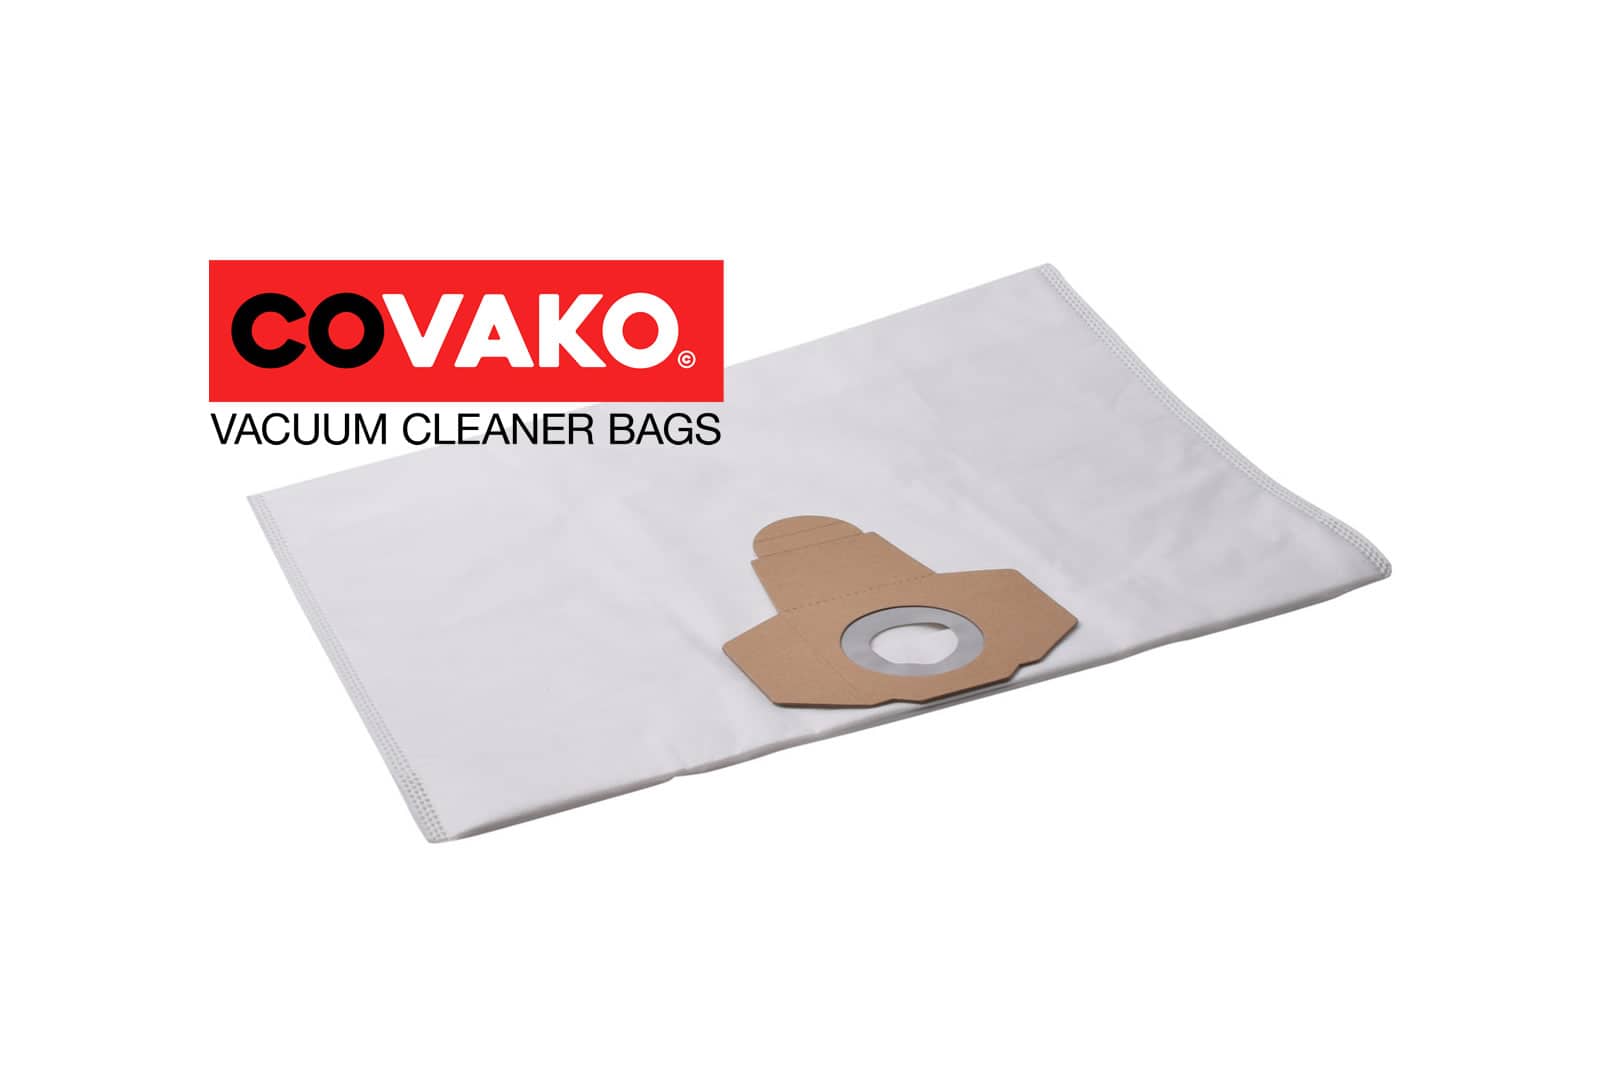 Einhell TC-VC 1815 / Synthesis - Einhell vacuum cleaner bags